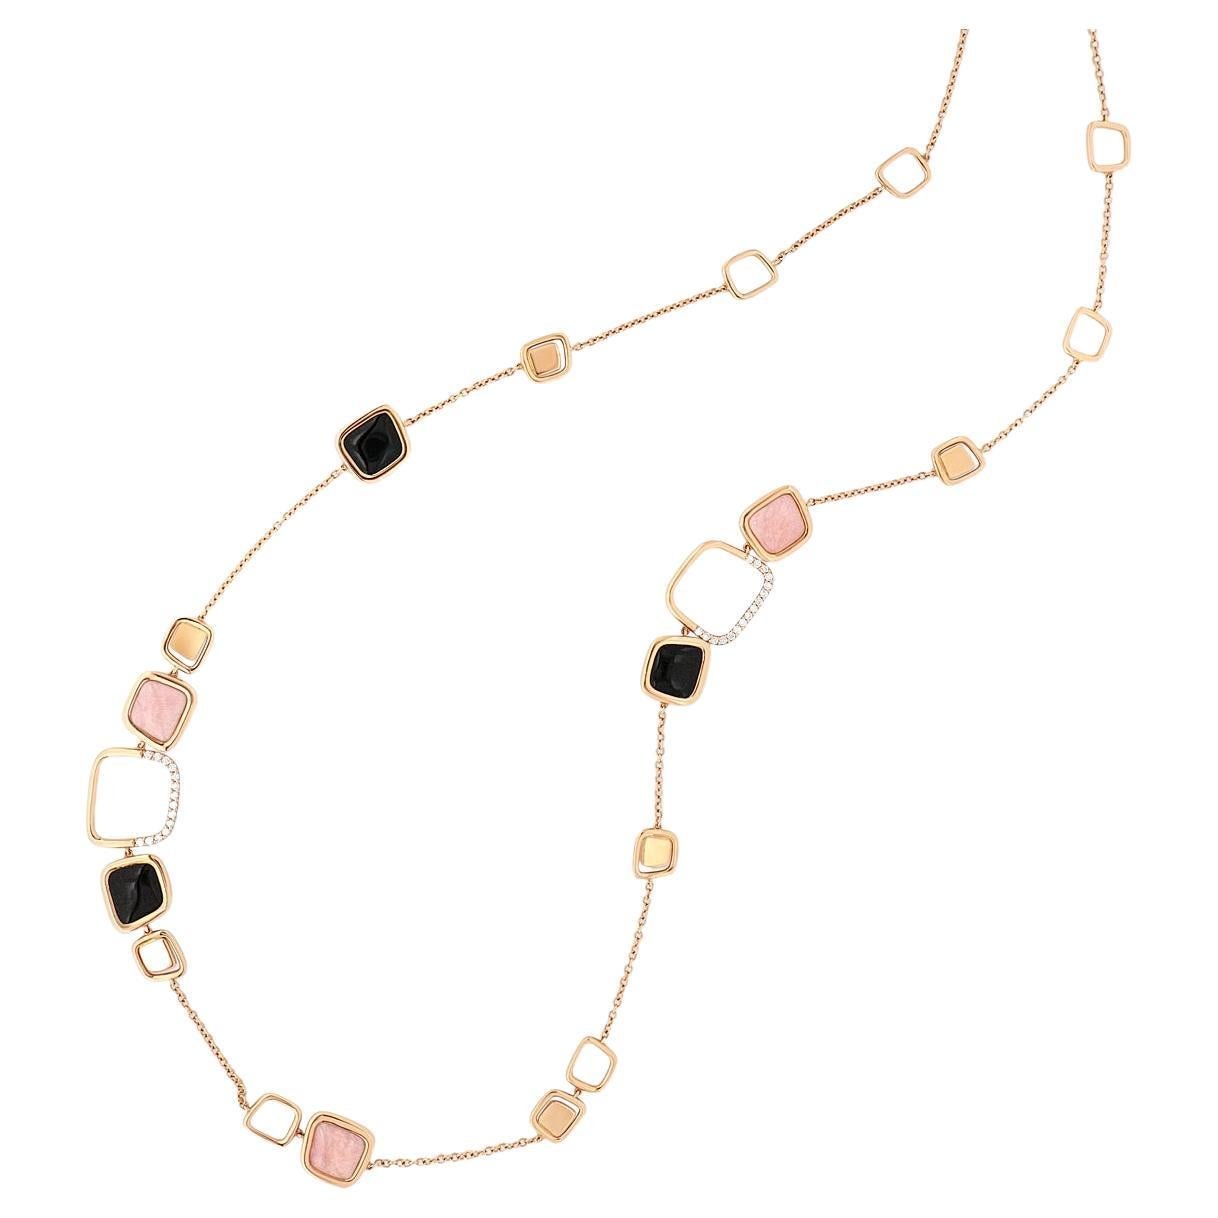 30.75ct Onyx, Pink Opal and White Diamonds Long Square Necklace in 18k Rose Gold